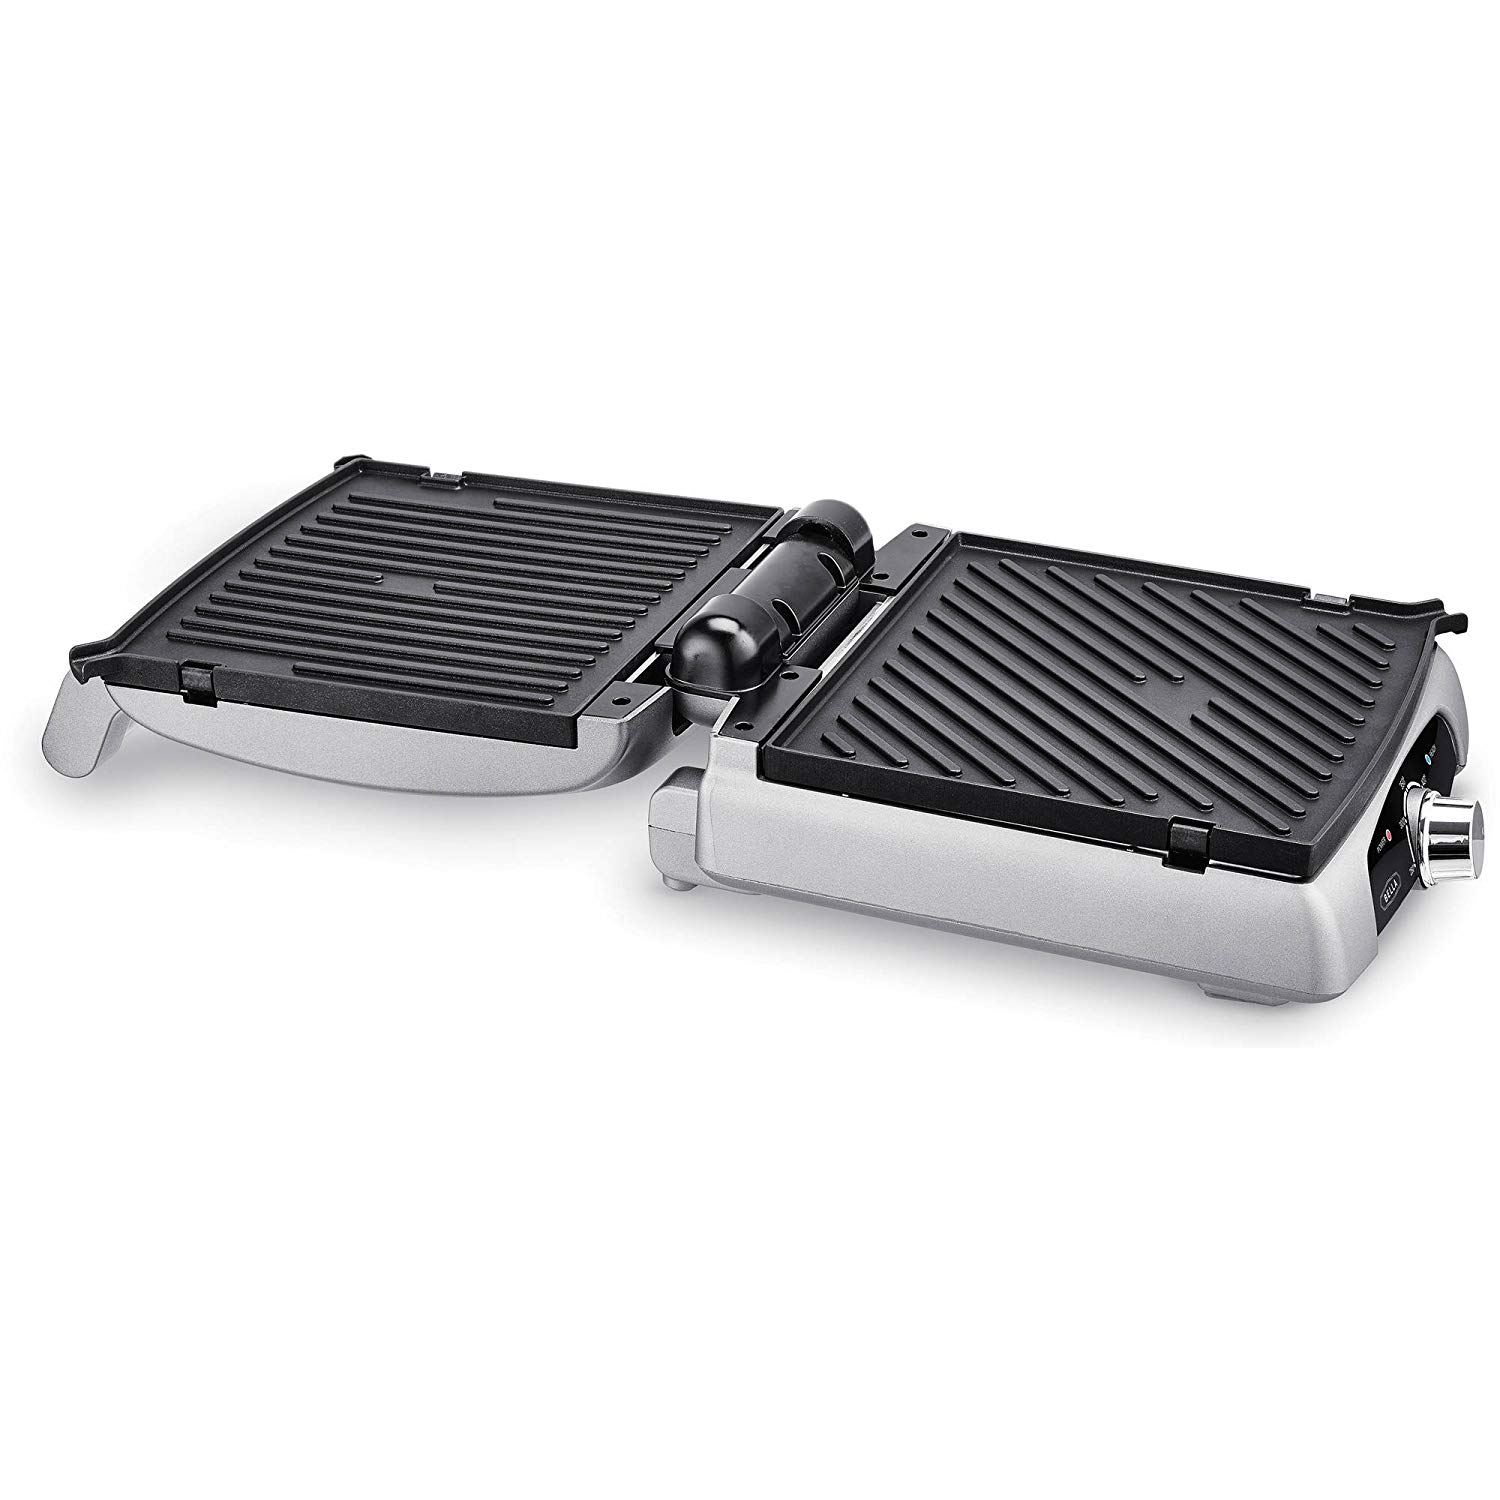 Barbecue Grill - Buy Electric, Charcoal and Propane Grills At Best Prices